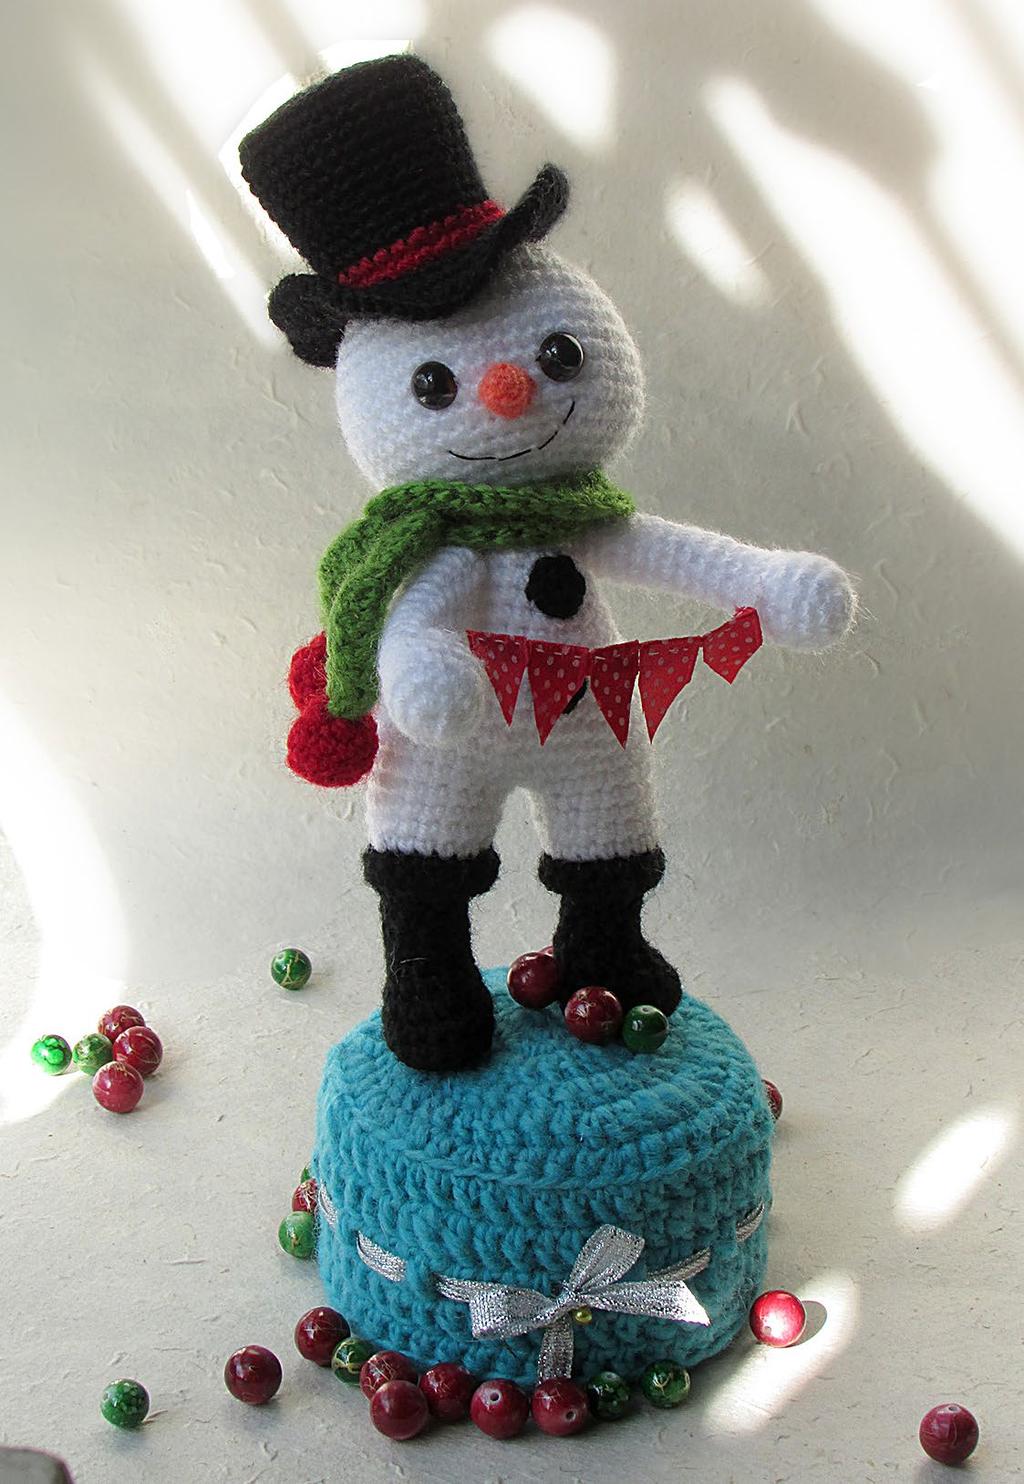 The Runaway Snowman A FREE AMIGURUMI PATTERN BY TALES OF TWISTED FIBERS For